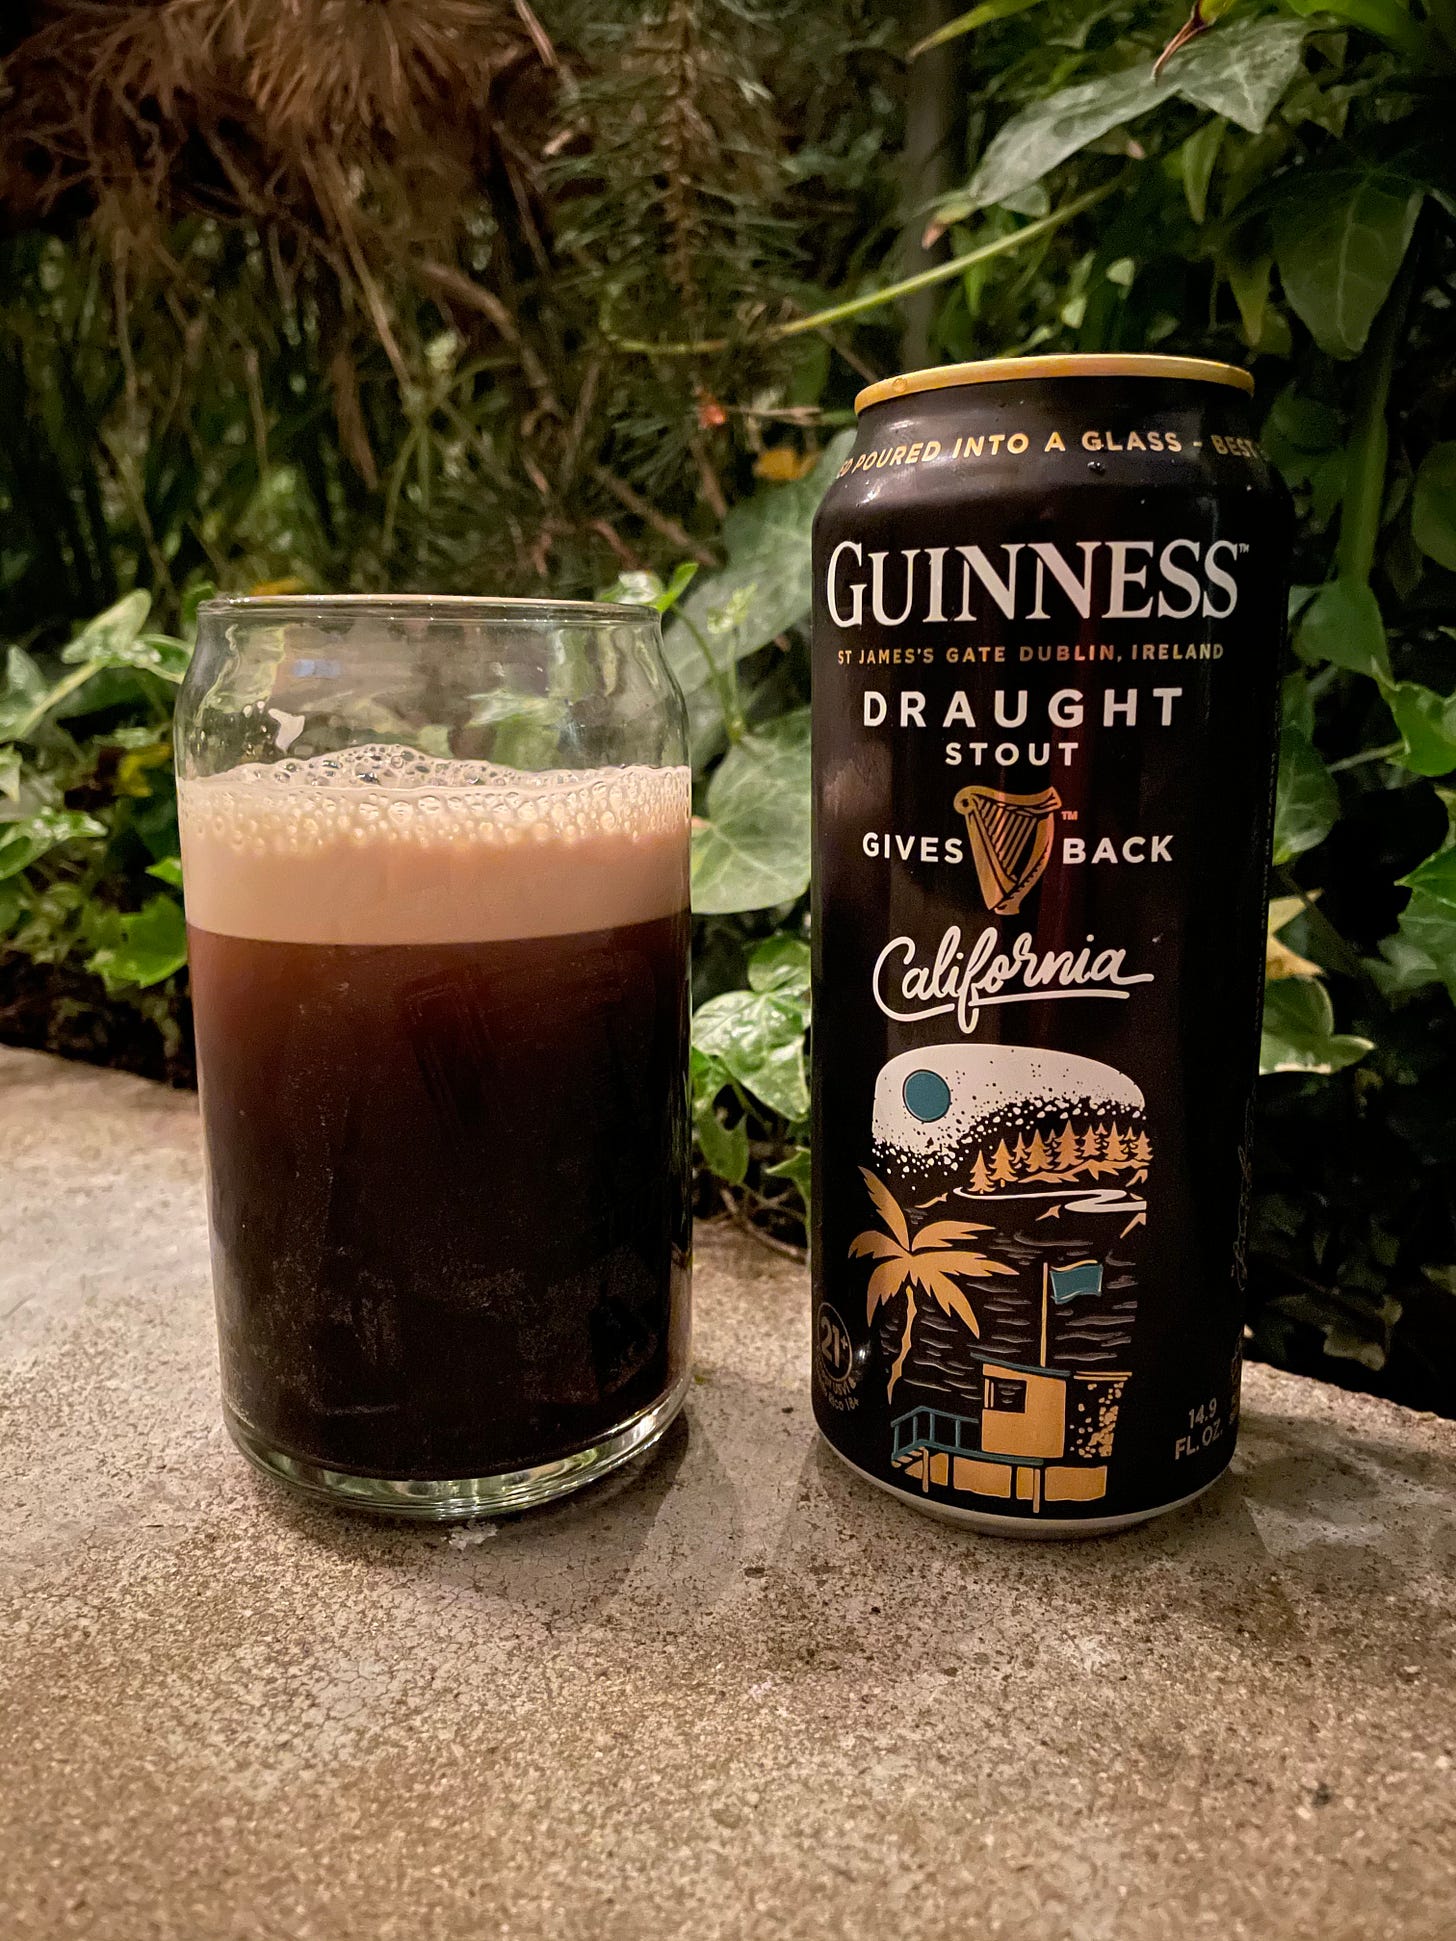 A glass of Guinness Stout next to a can of Guiness with California on the label